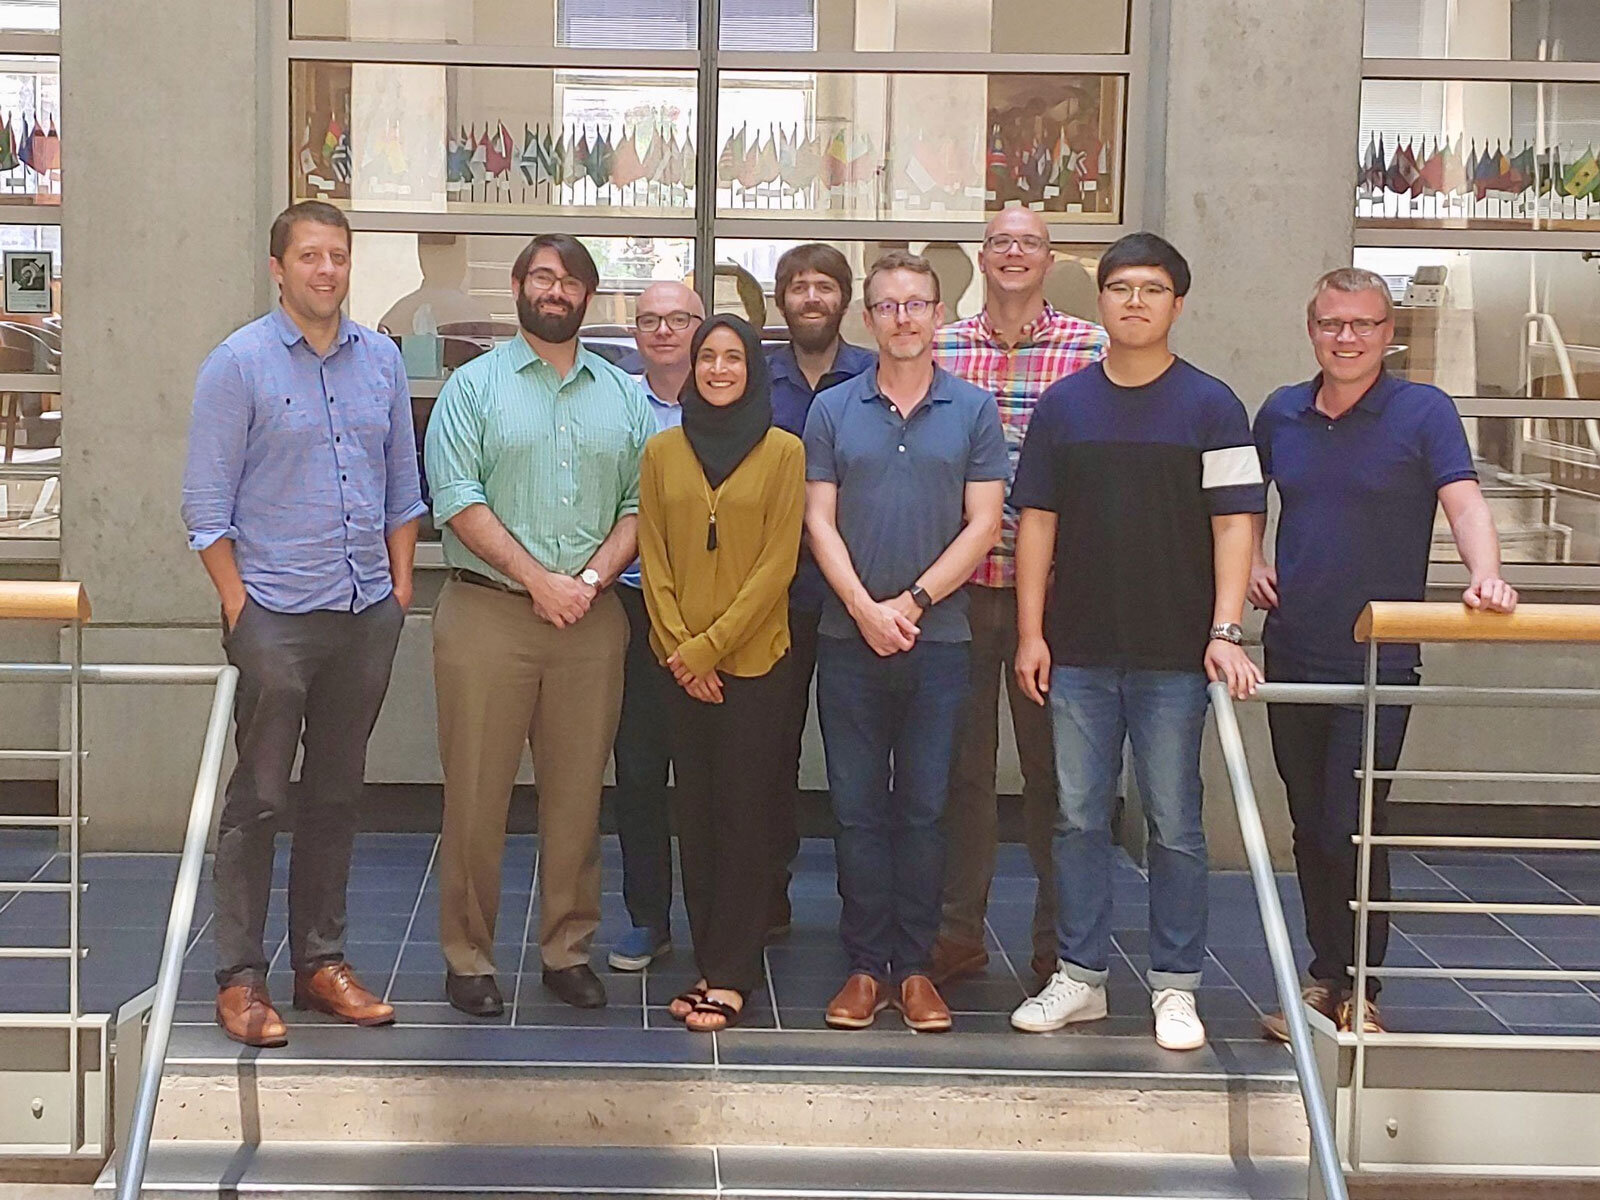 Participants of the second IGRI meeting at Syracuse University. August 3, 2019.